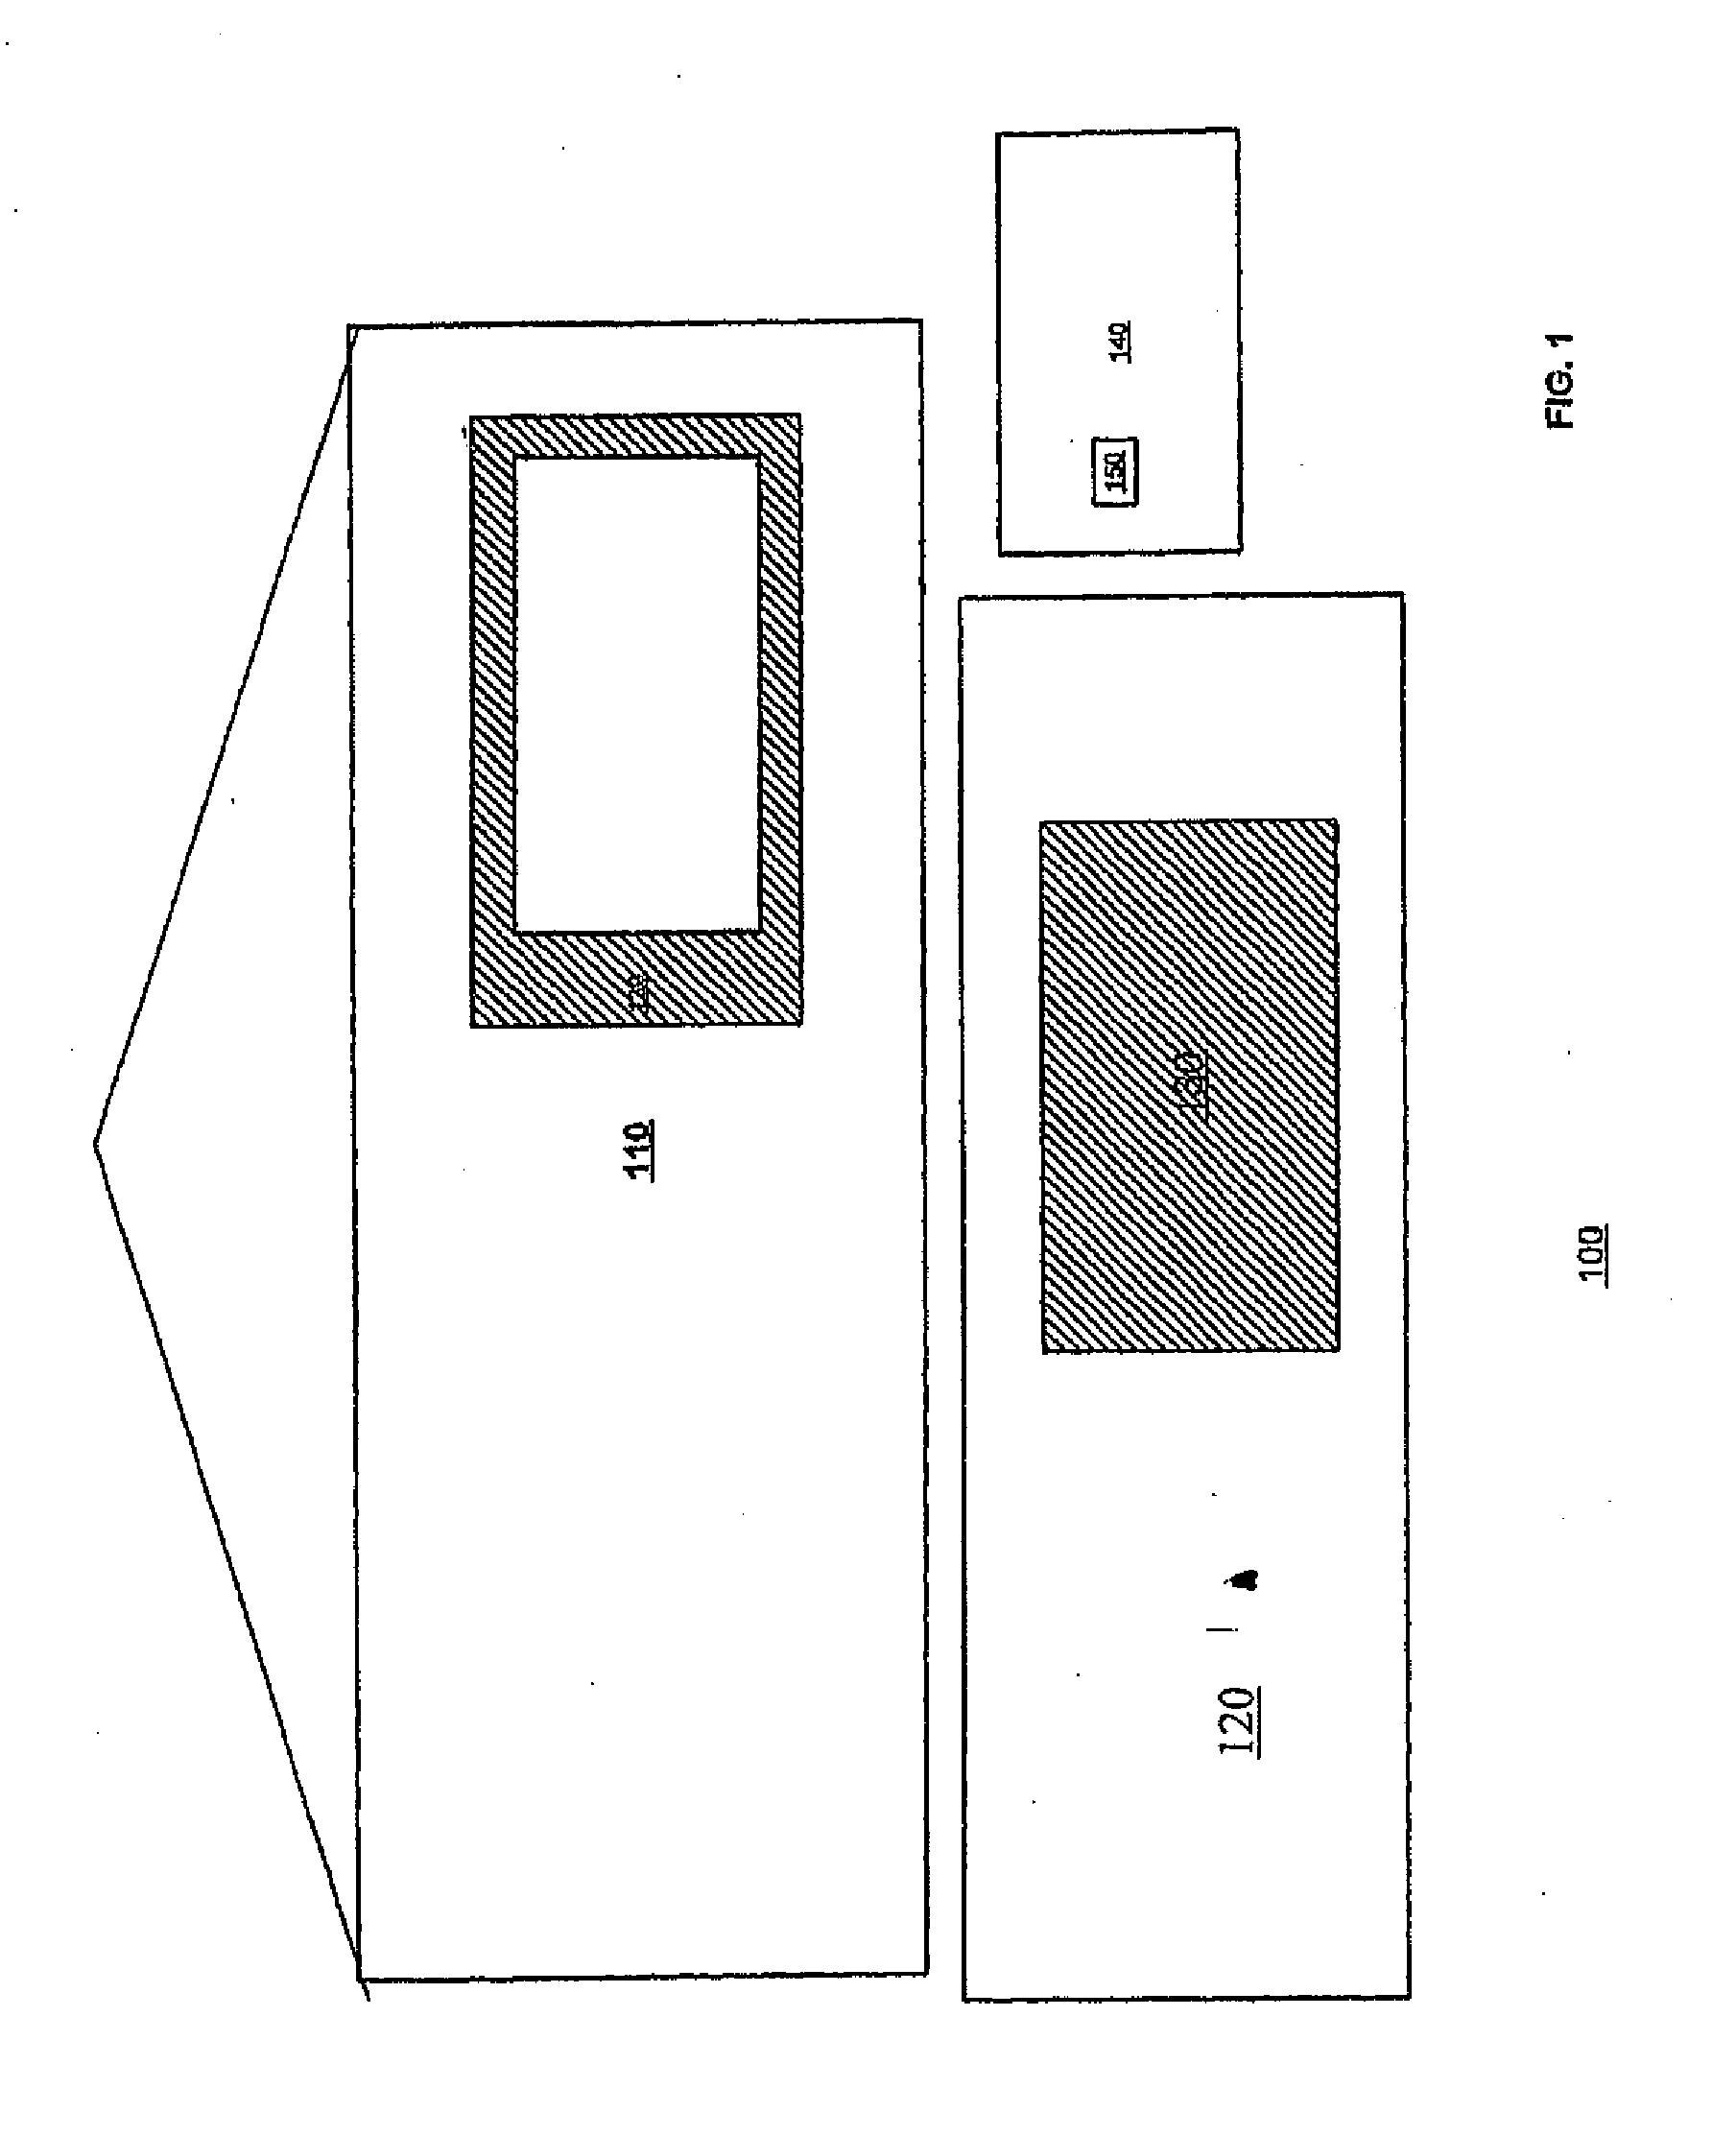 System And Method For Protection Against Skimming Of Information From Contactless Cards